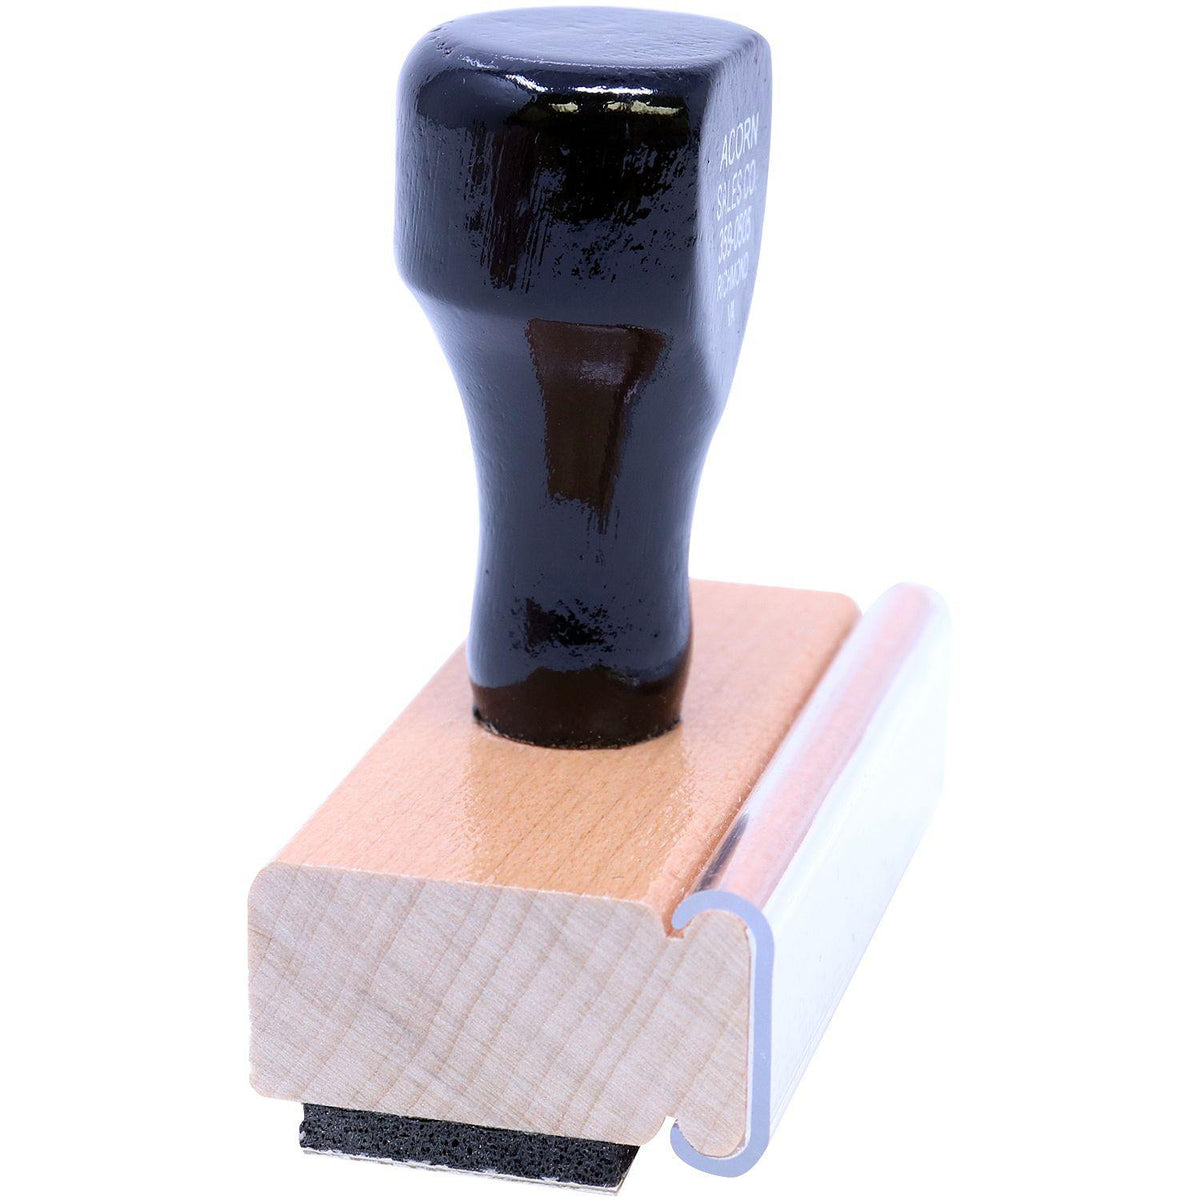 Side View of Large Caution Rubber Stamp at an Angle